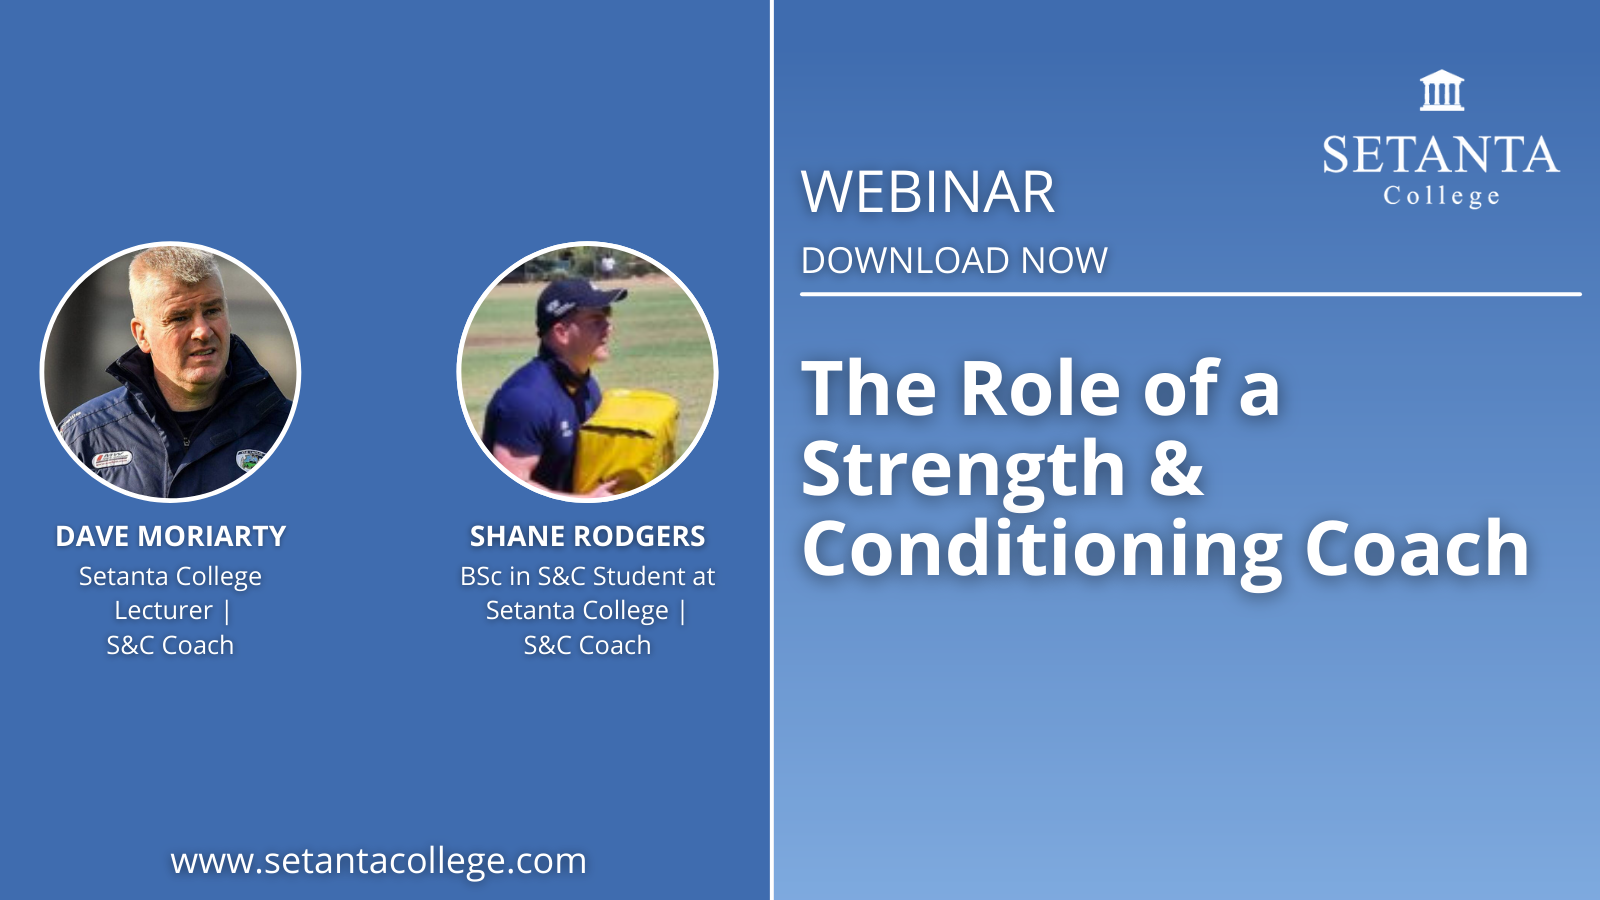 The Role of a Strength & Conditioning Coach